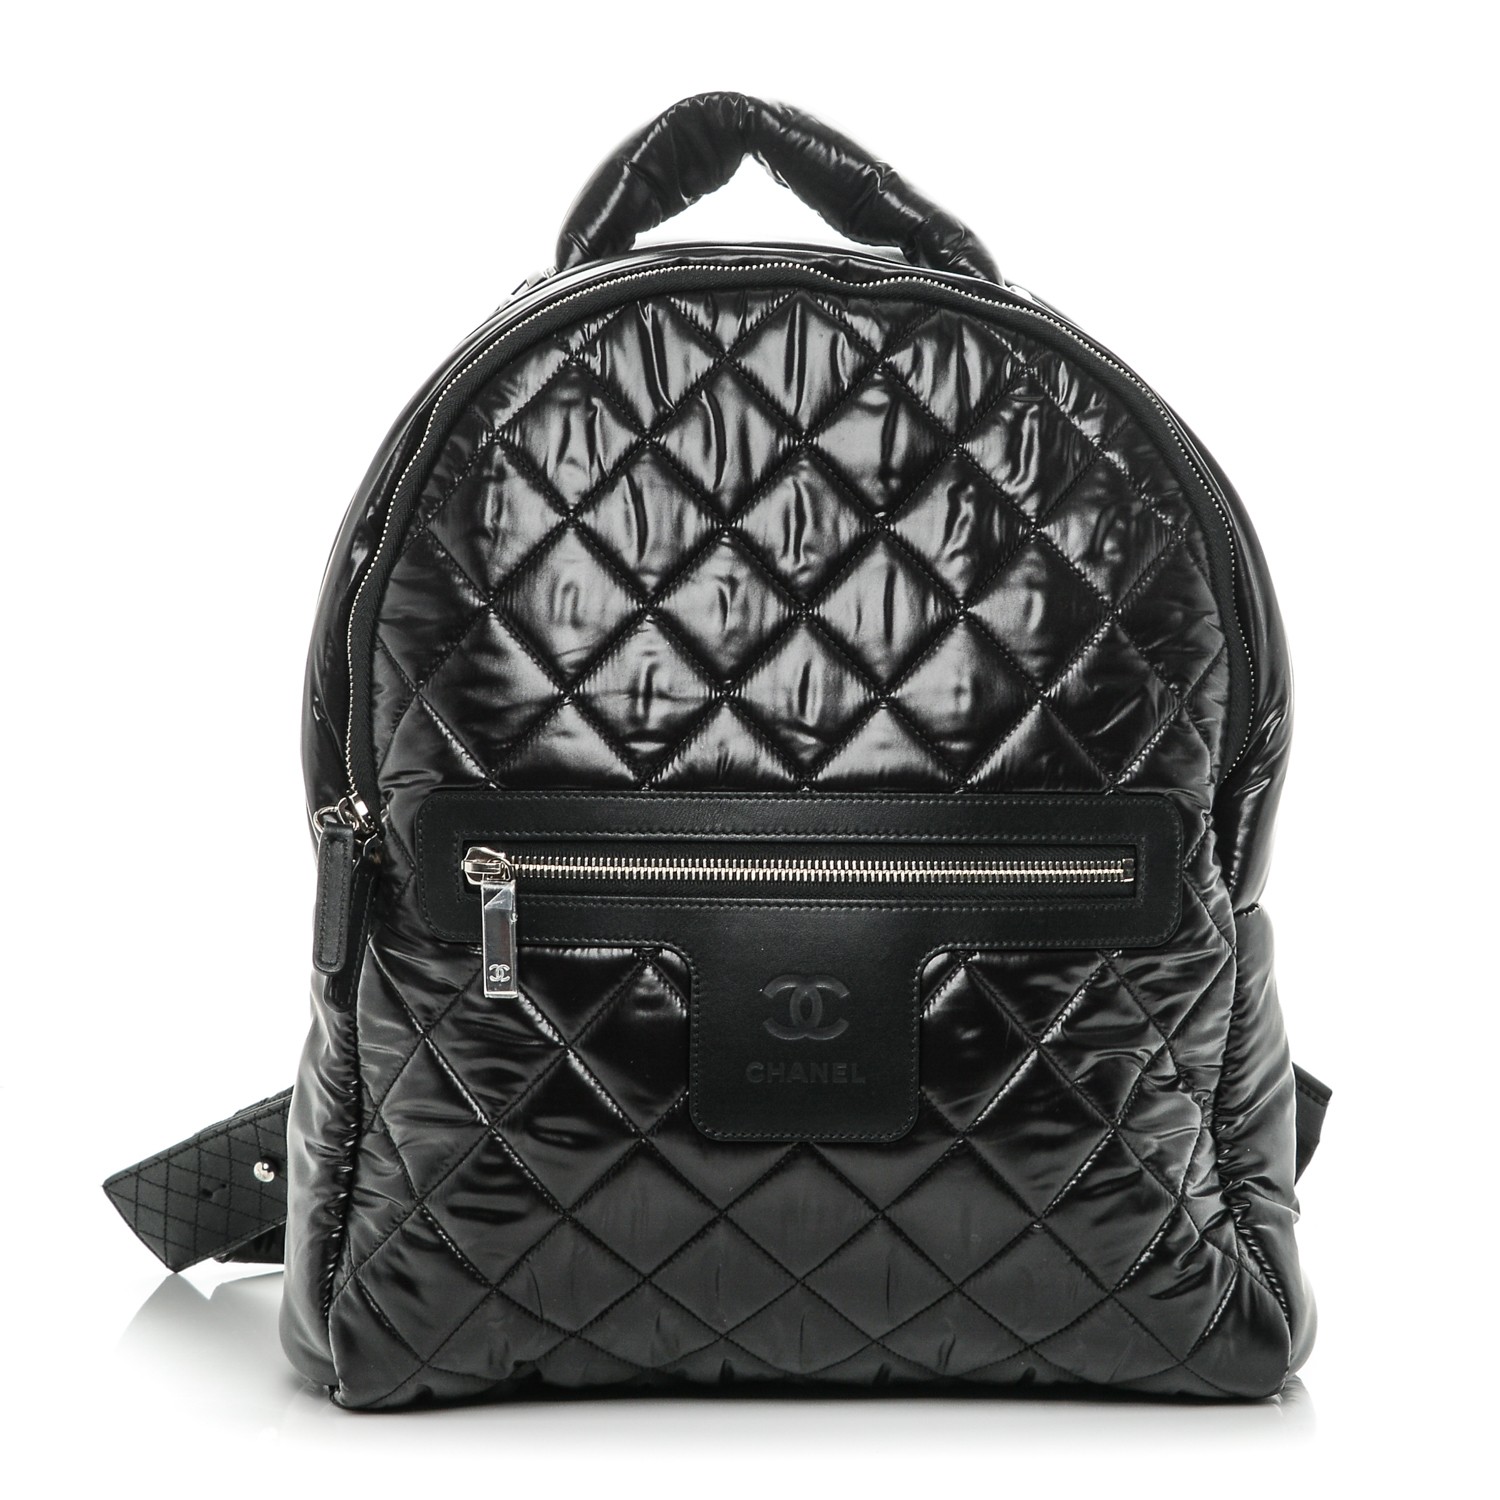 CHANEL Nylon Quilted Coco Cocoon Backpack Black 187668